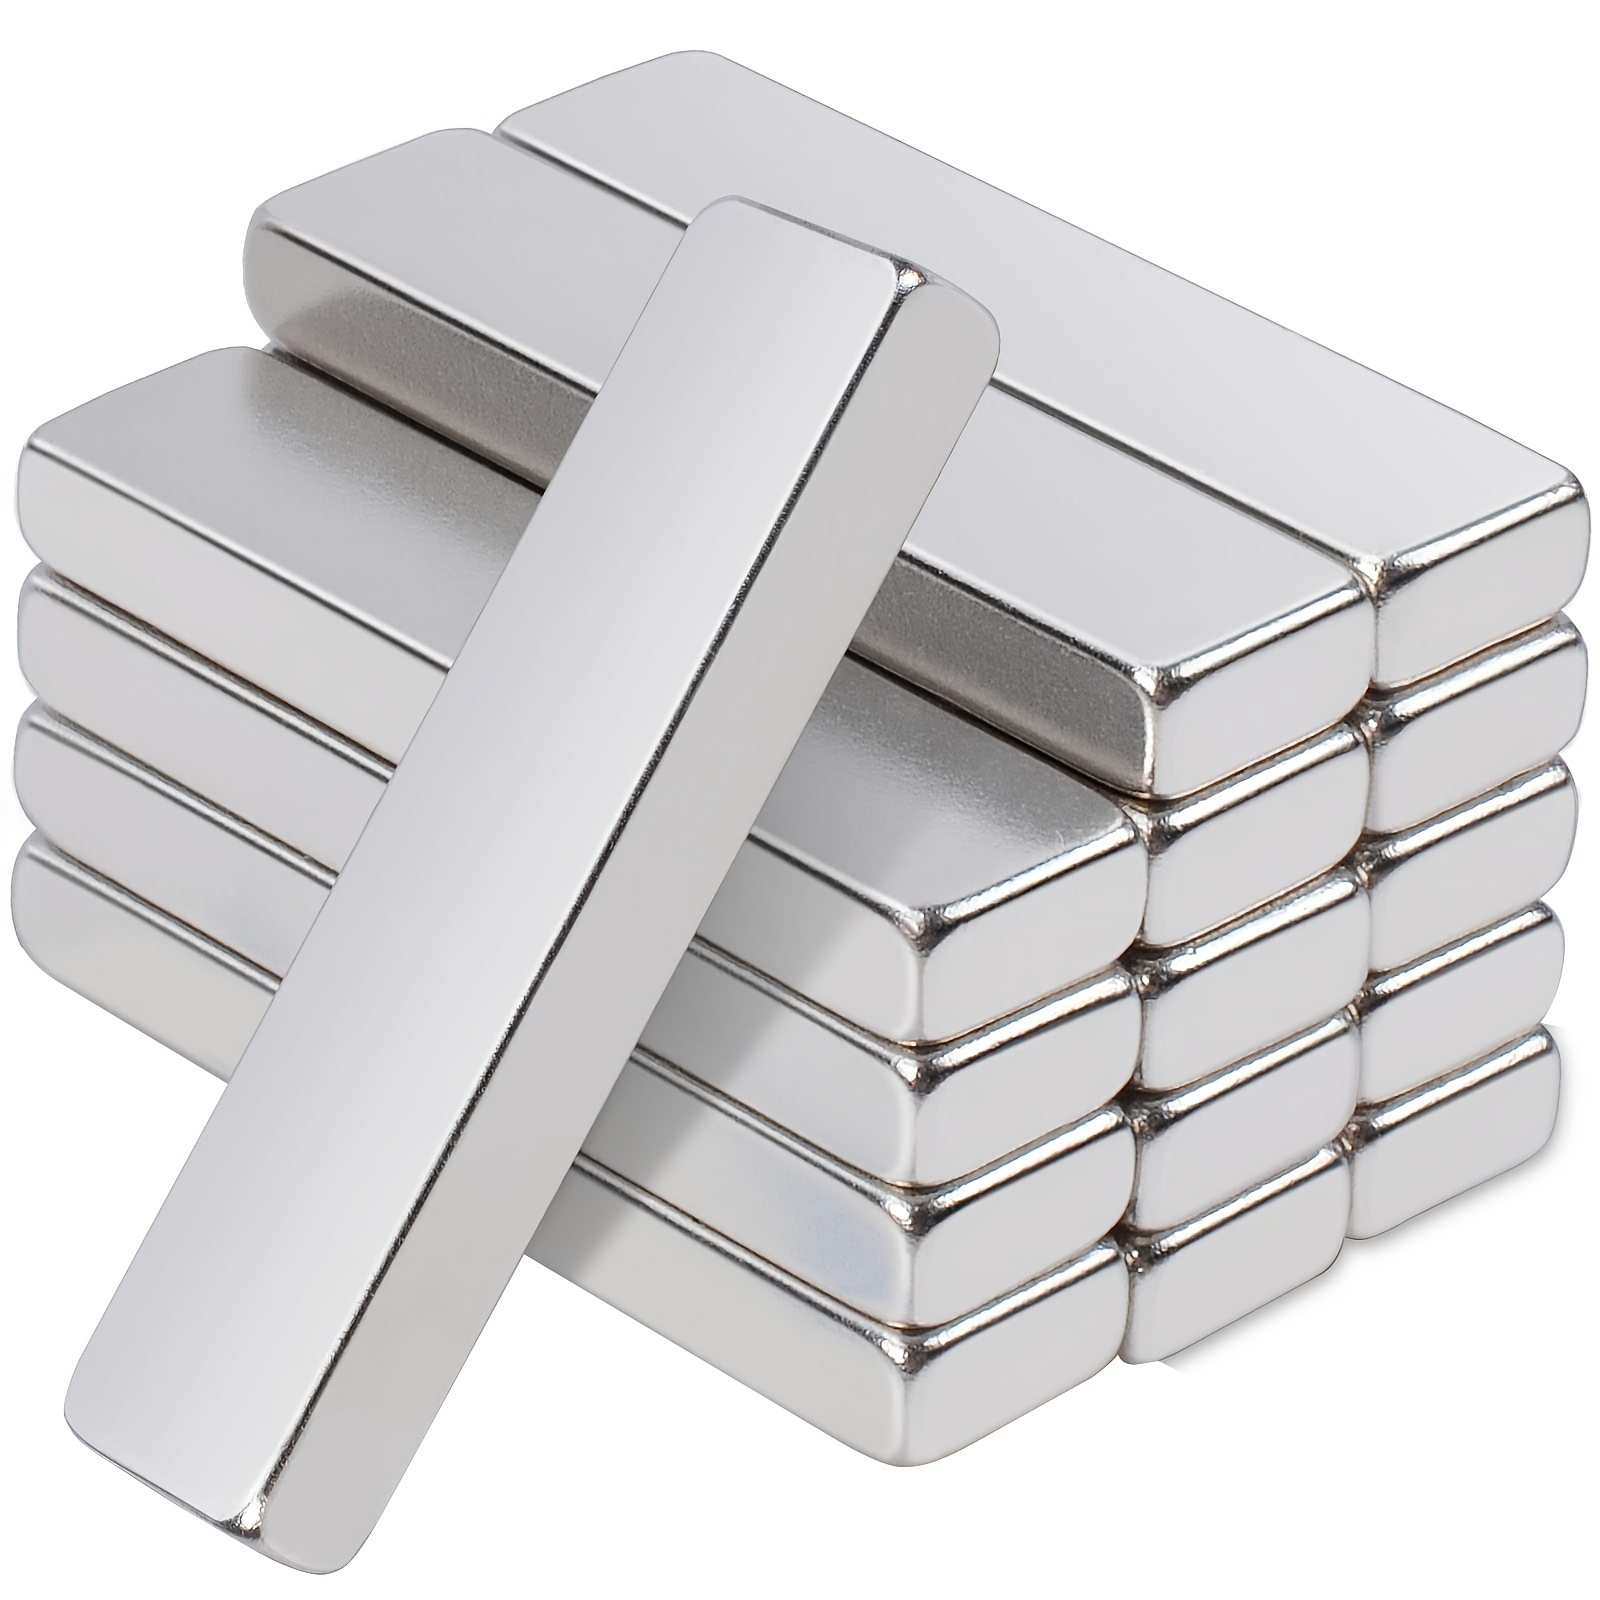 

14pcs Super Strong Neodymium Magnets - Heavy Duty Rare Earth Rectangular Bars - Perfect For Kitchen, Tool Storage & Office - 40x10x5mm